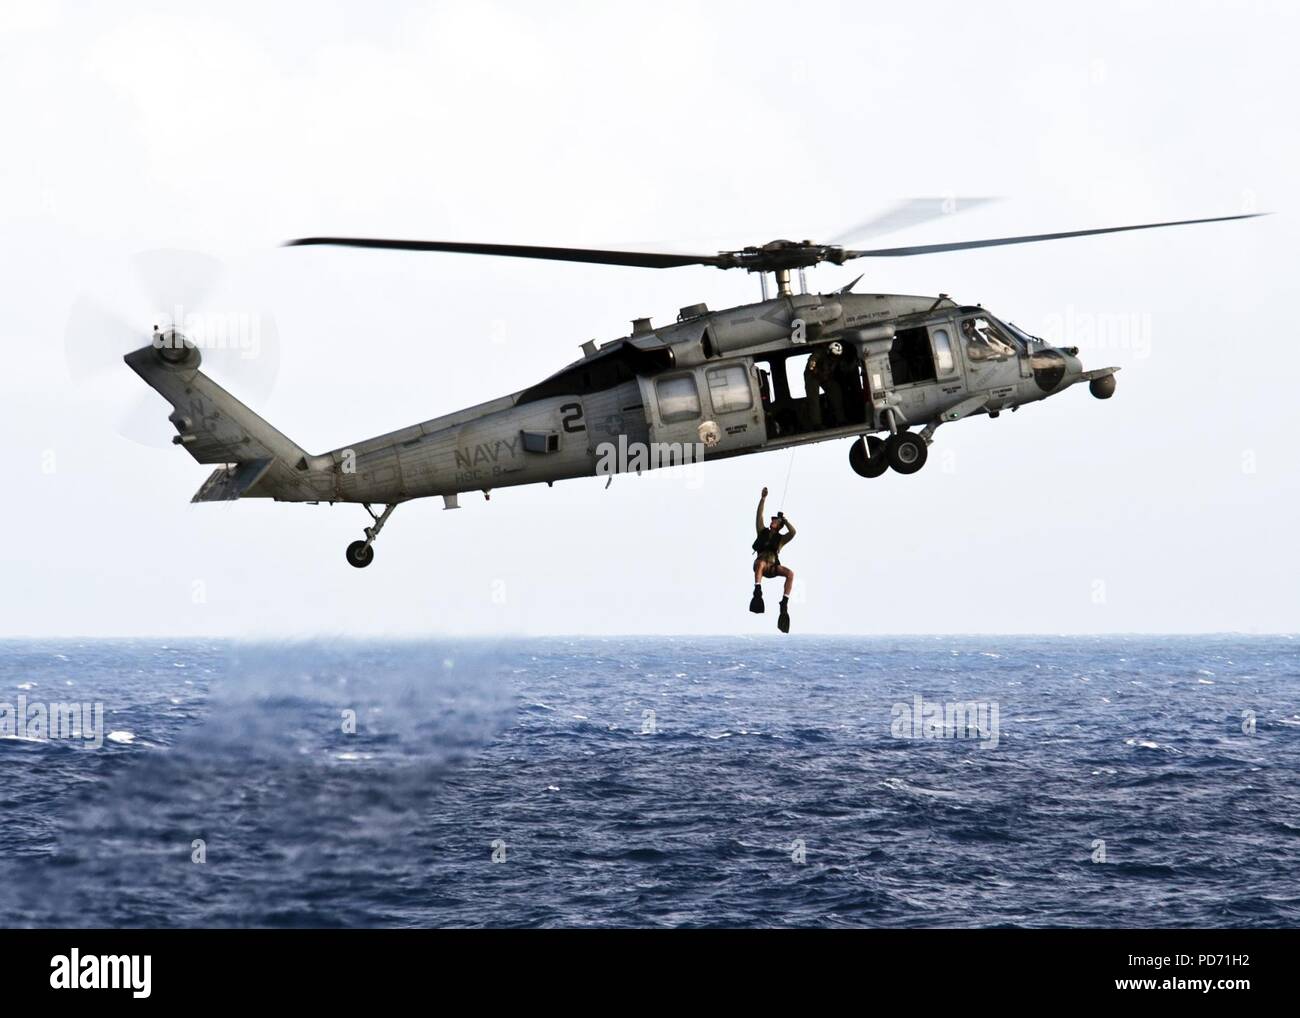 An MH-60S Sea Hawk helicopter from the Eightballers of Helicopter Sea Combat Squadron (HSC) 8 demonstrates how search and rescue sailors operate Stock Photo